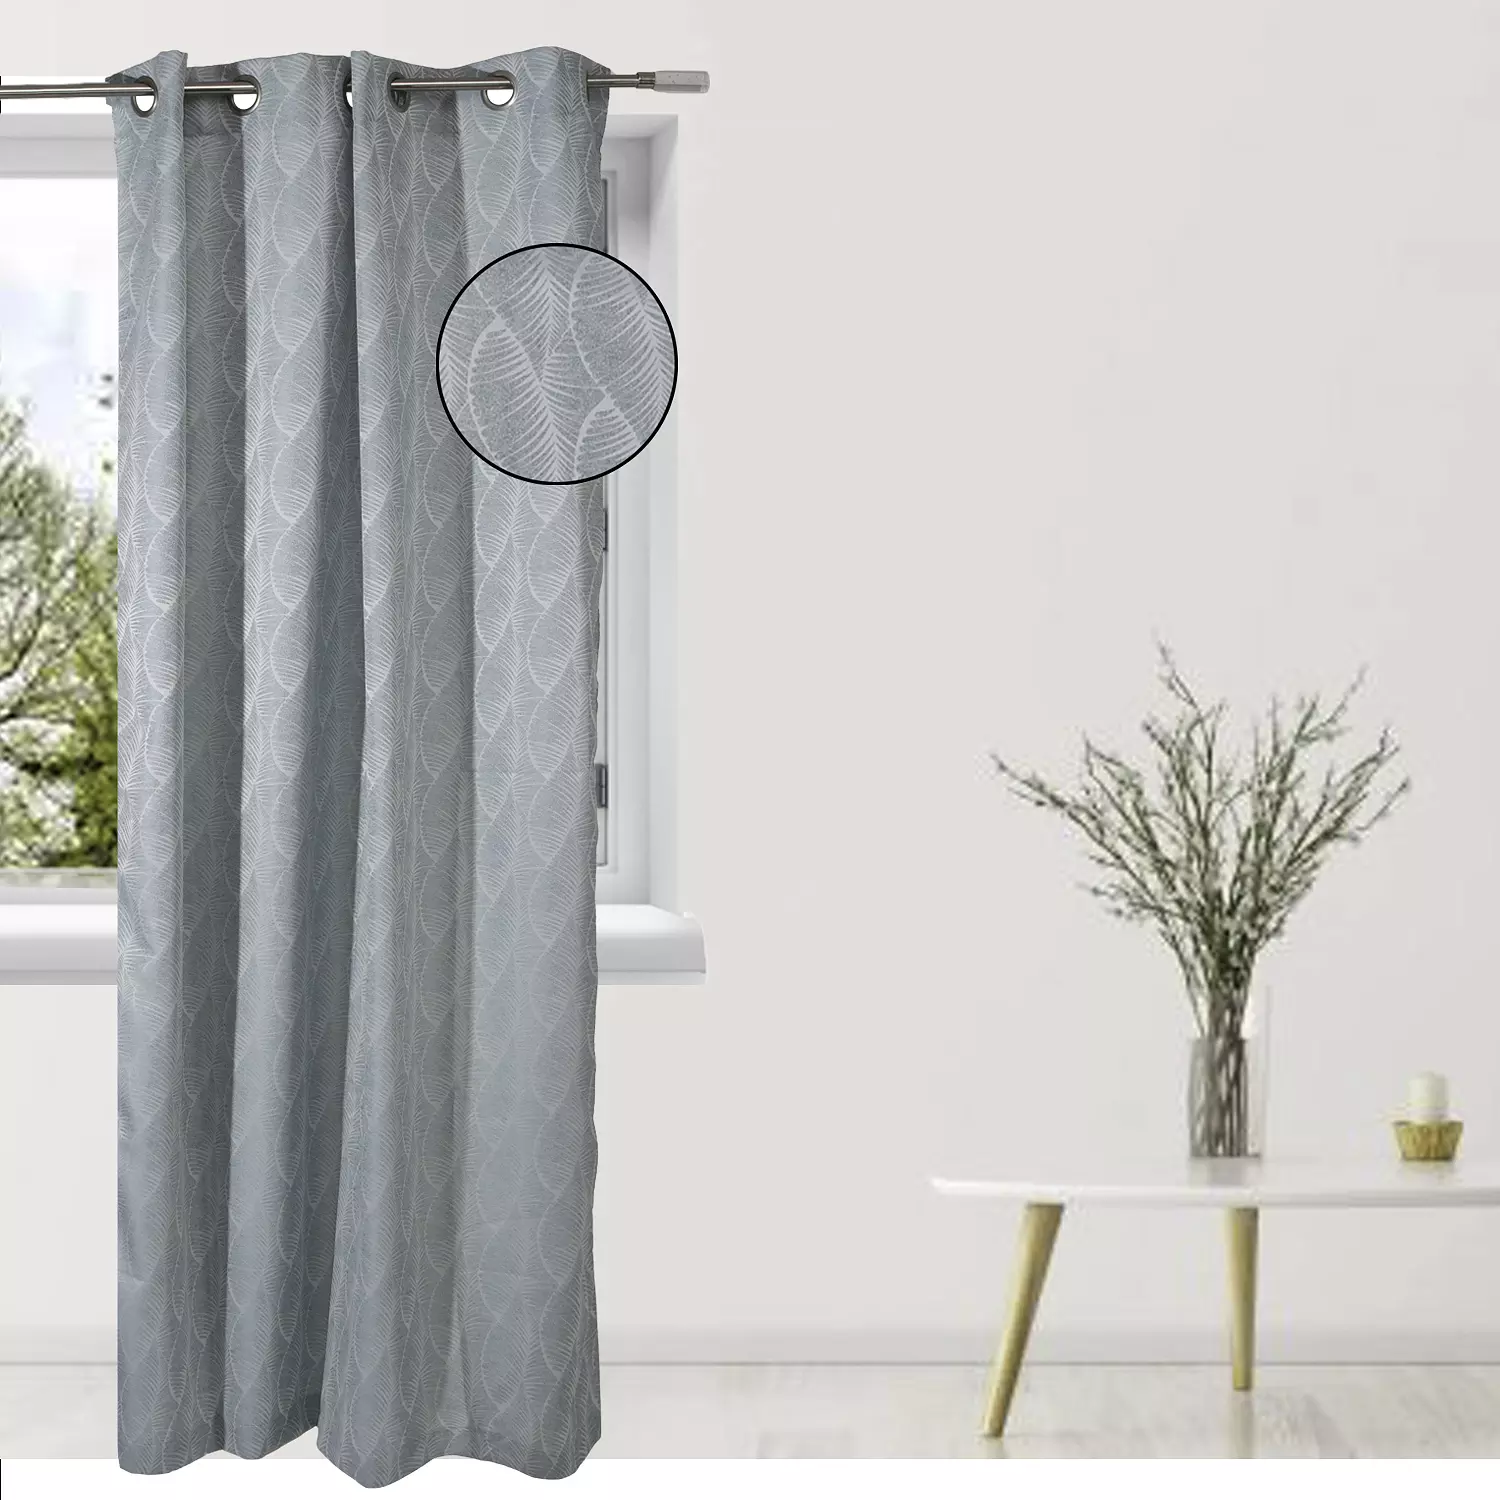 Amberly, jacquard curtain with metal grommets, 54"x84", pale blue